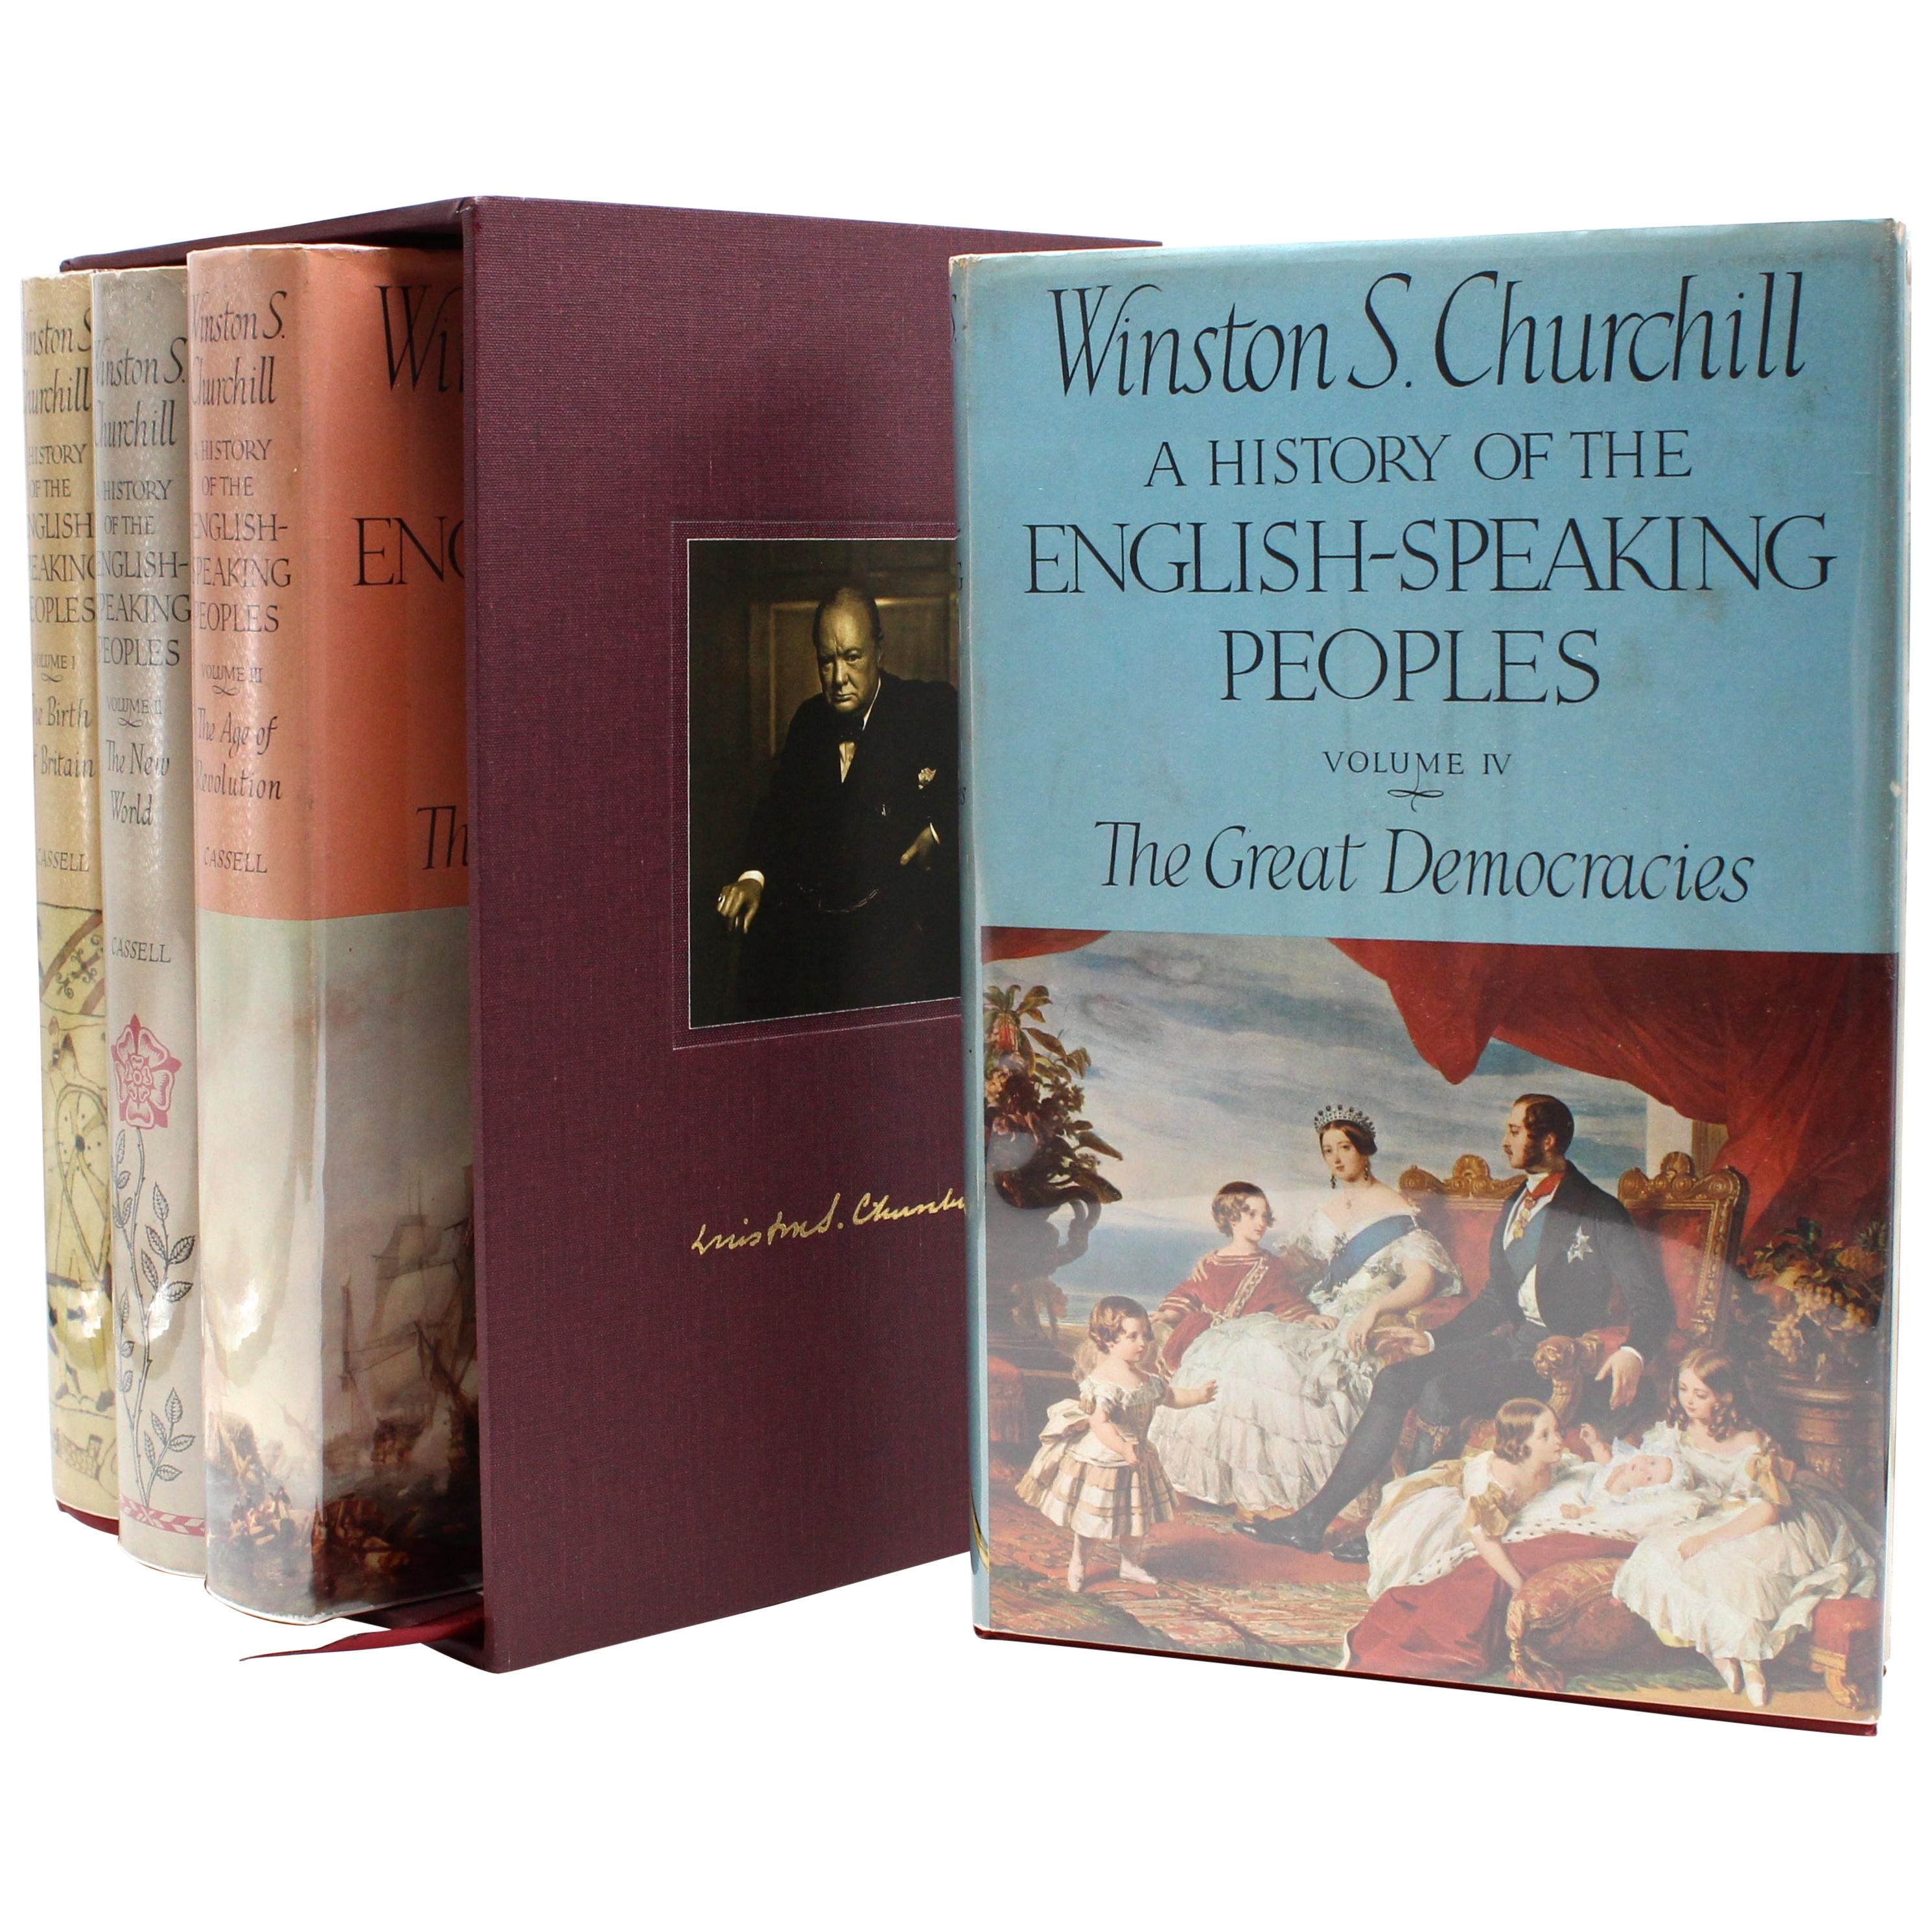 History of the English-Speaking Peoples by Winston Churchill, First Edition